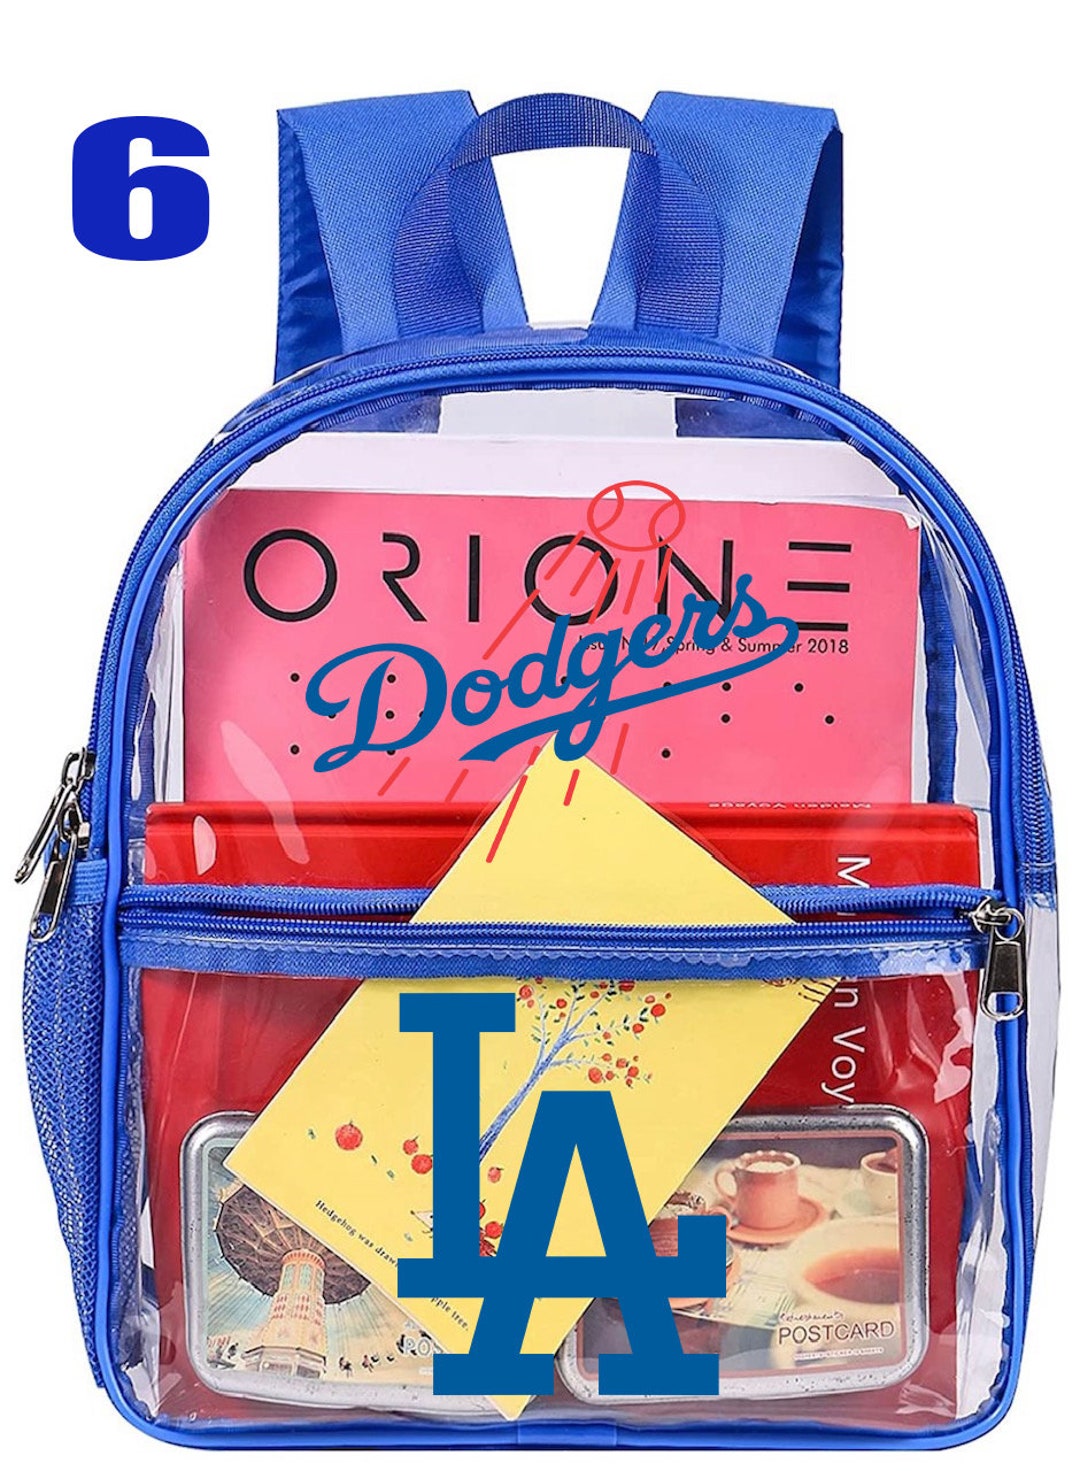 Los Angeles Dodgers Stadium Clear Tote